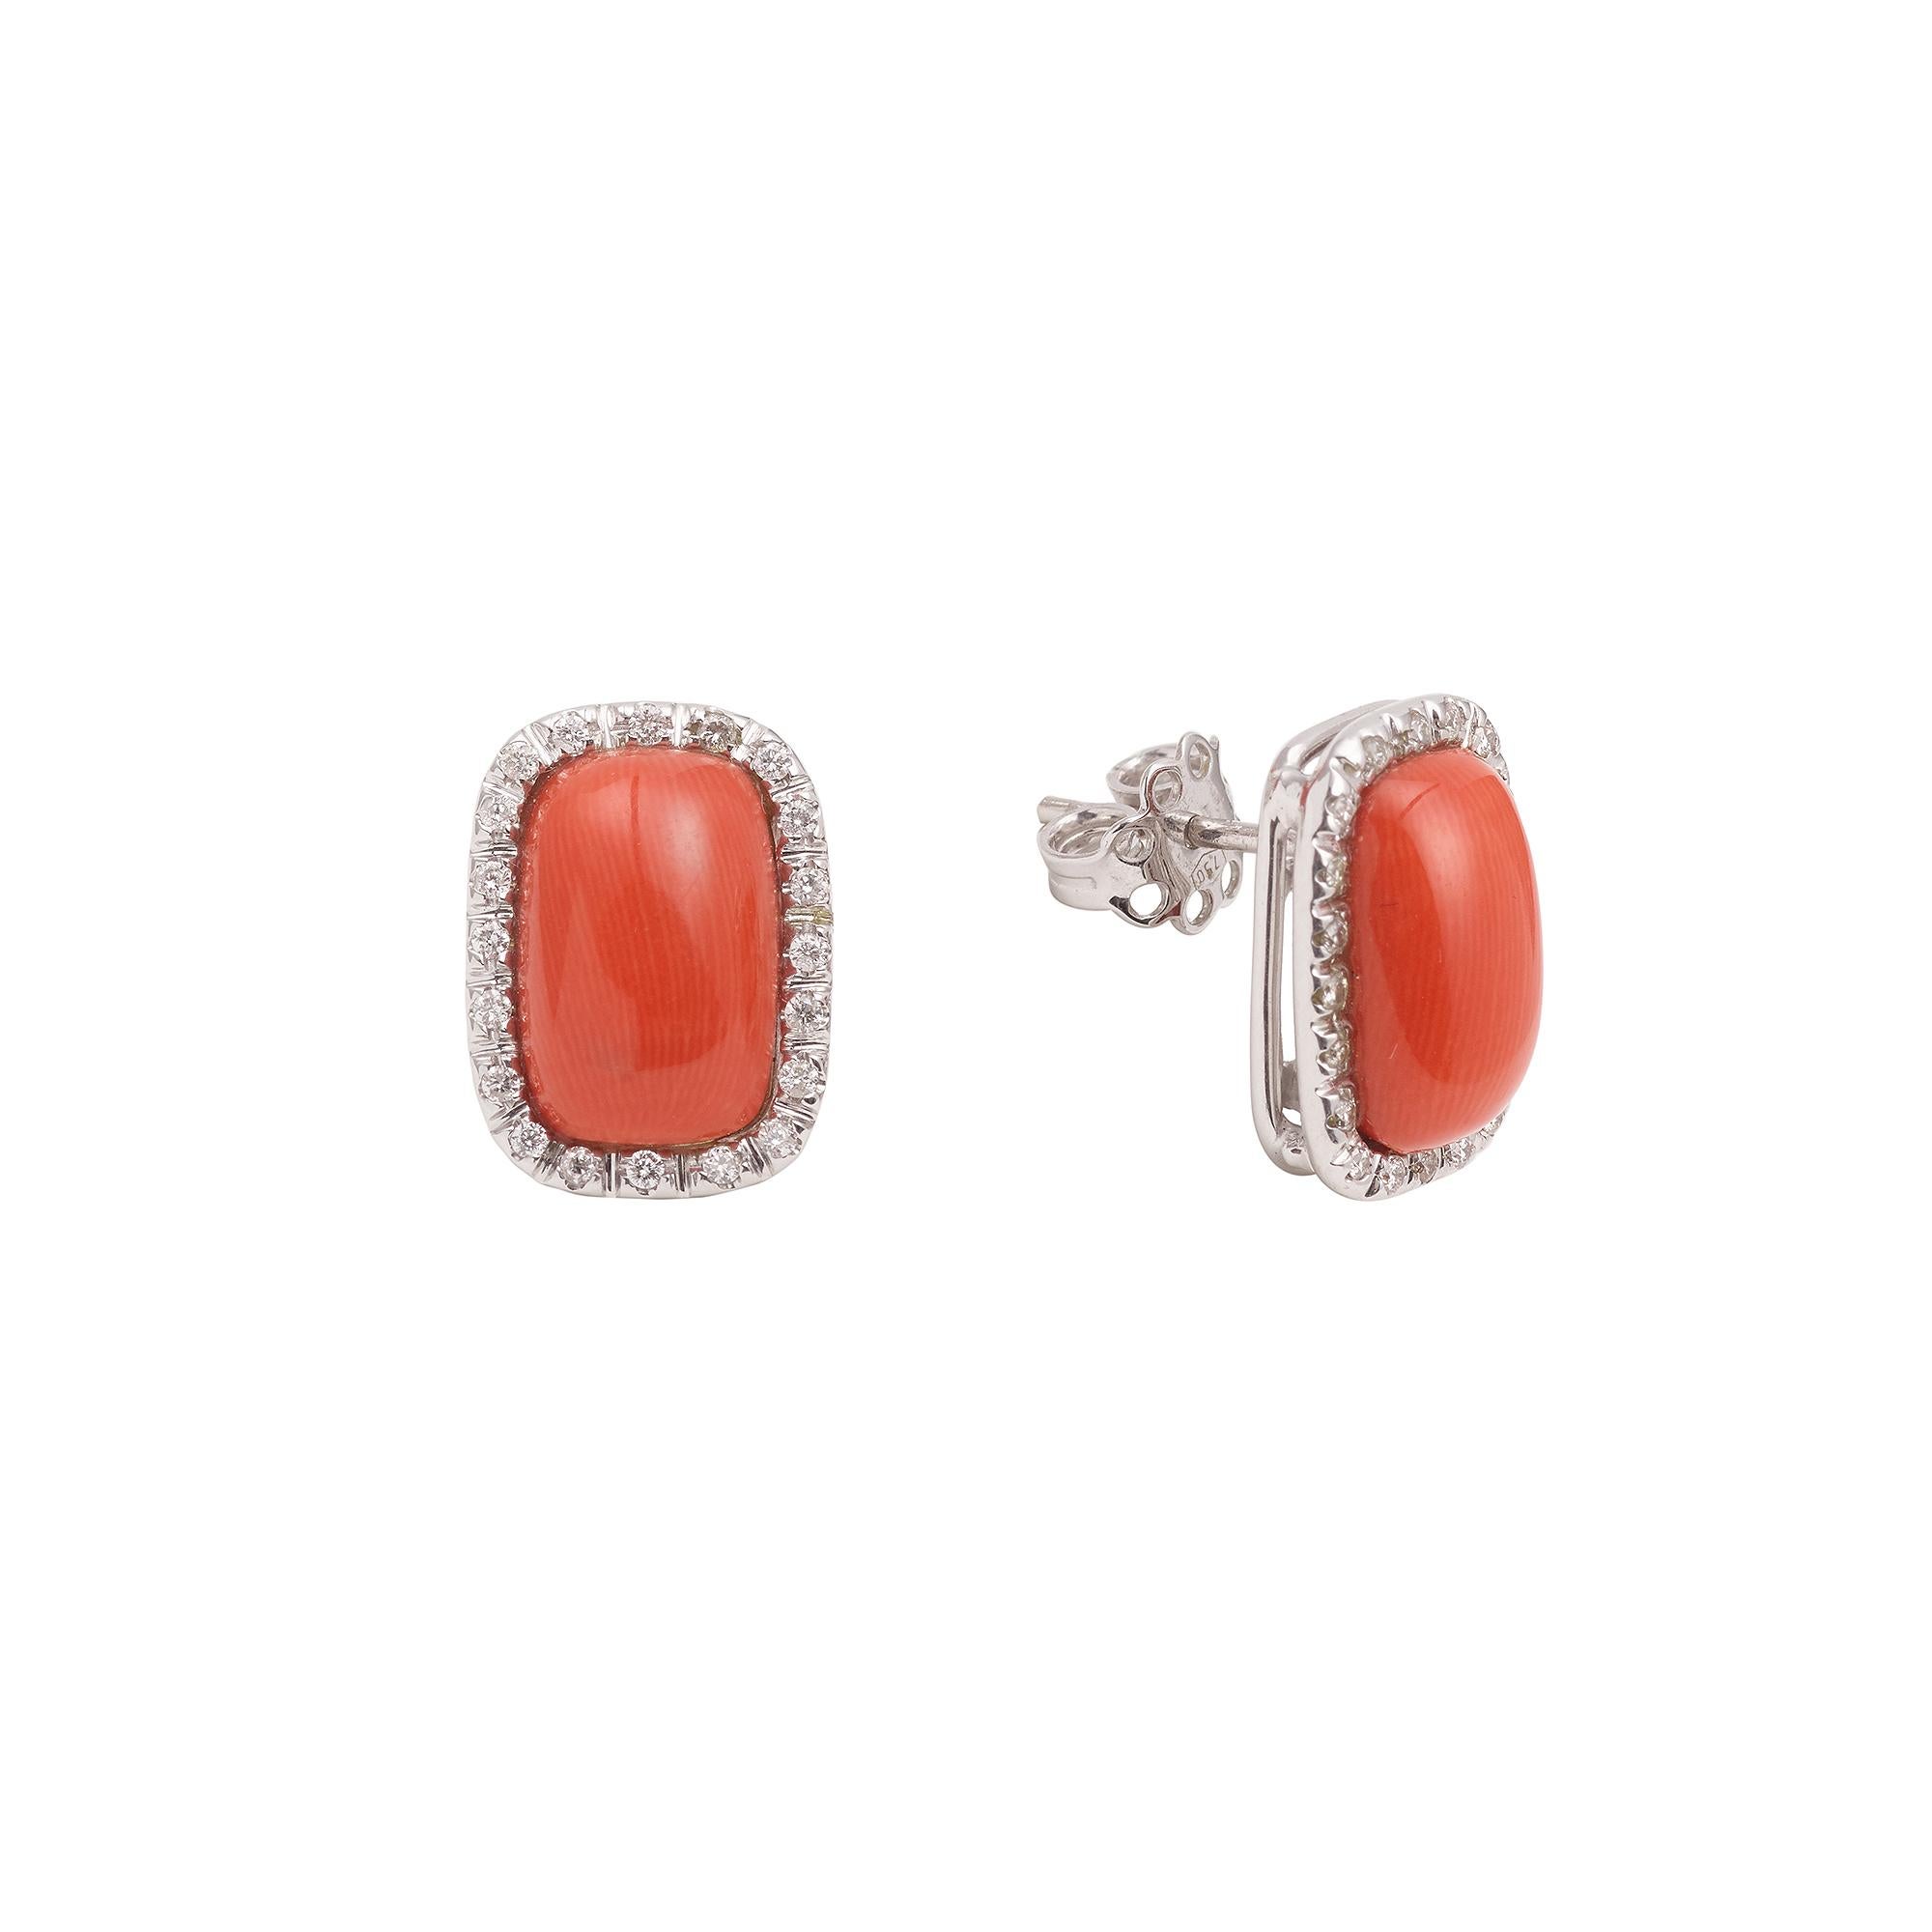 Lovely pair of white gold stud earrings set with diamonds pavements and orangy red coral cabochons.

Dimensions: 16.15 x 11.86 x 7.26 mm (0.635 x 0.467 x 0.286 inches)

Weight : 8.30 g

Total approximate weight of cabochons: 5.90 carats

Total